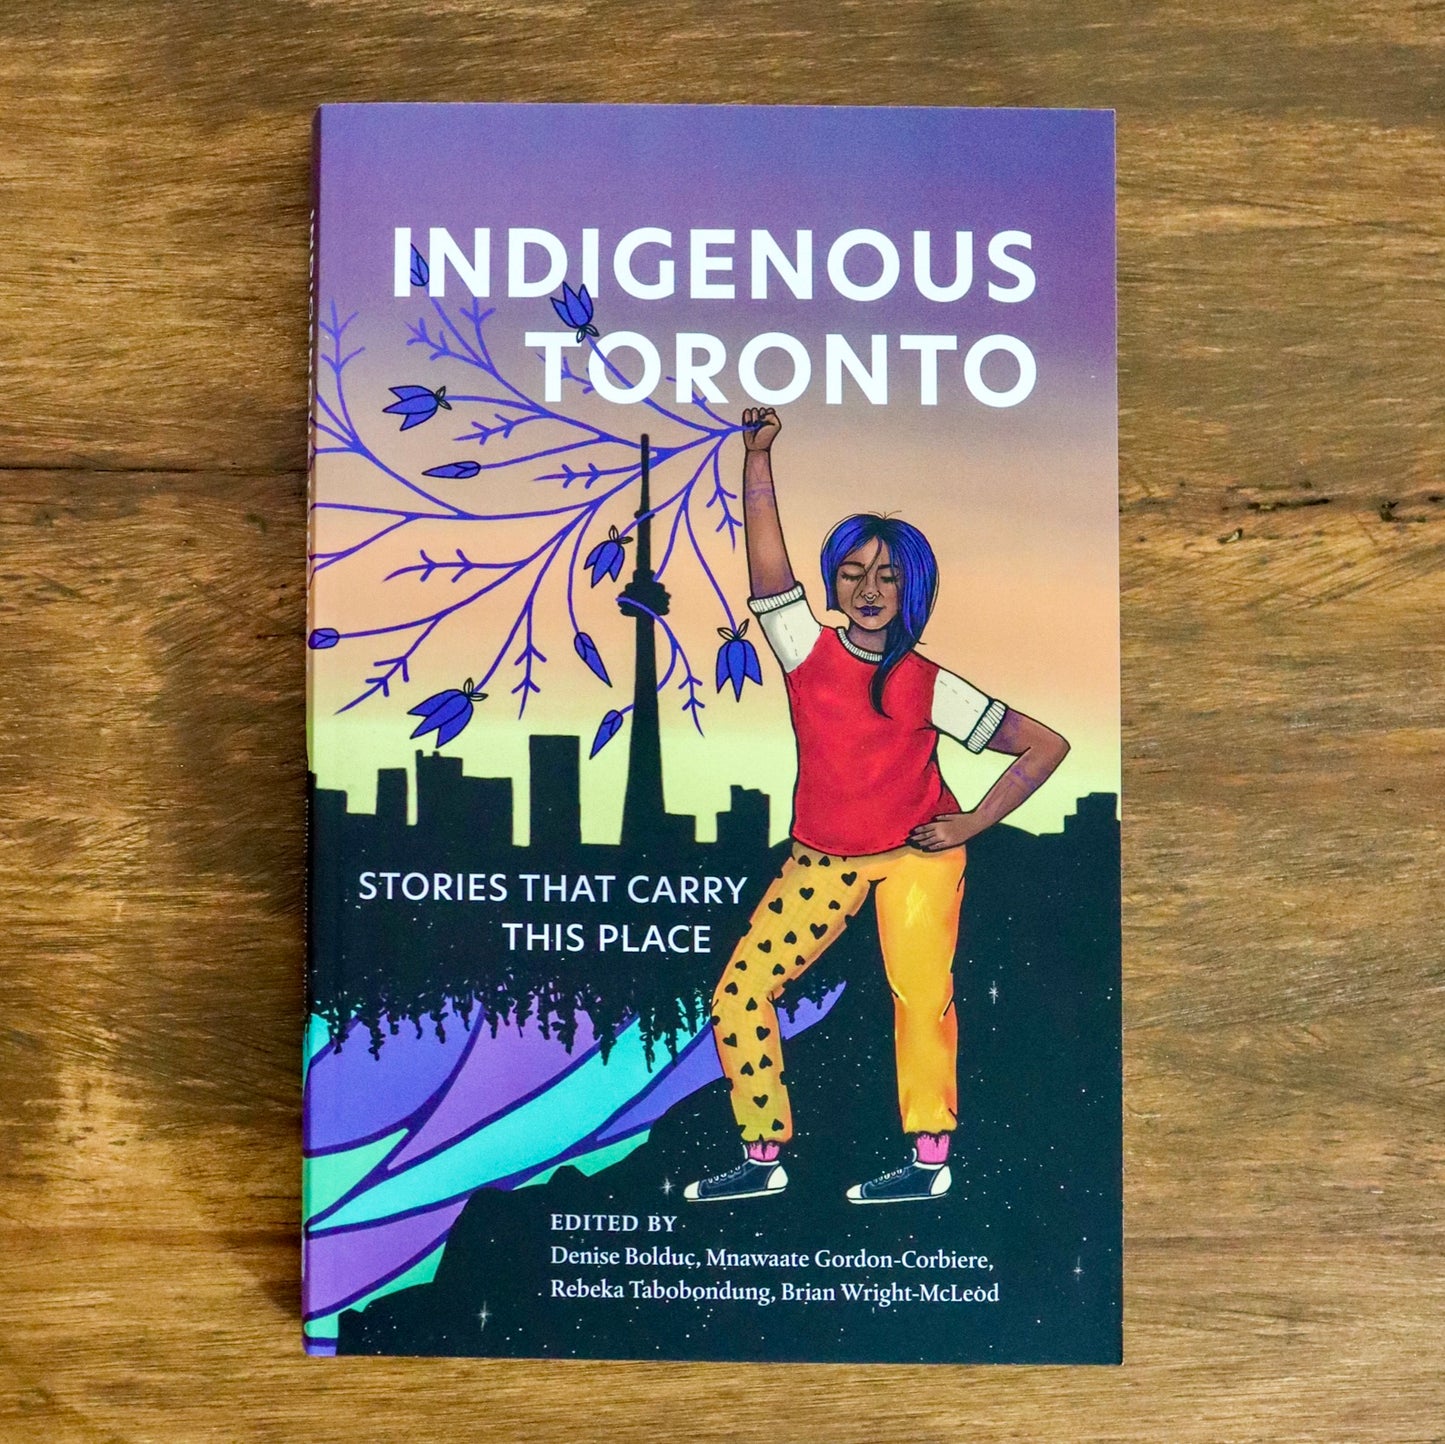 Indigenous Toronto: Stories That Carry This Place